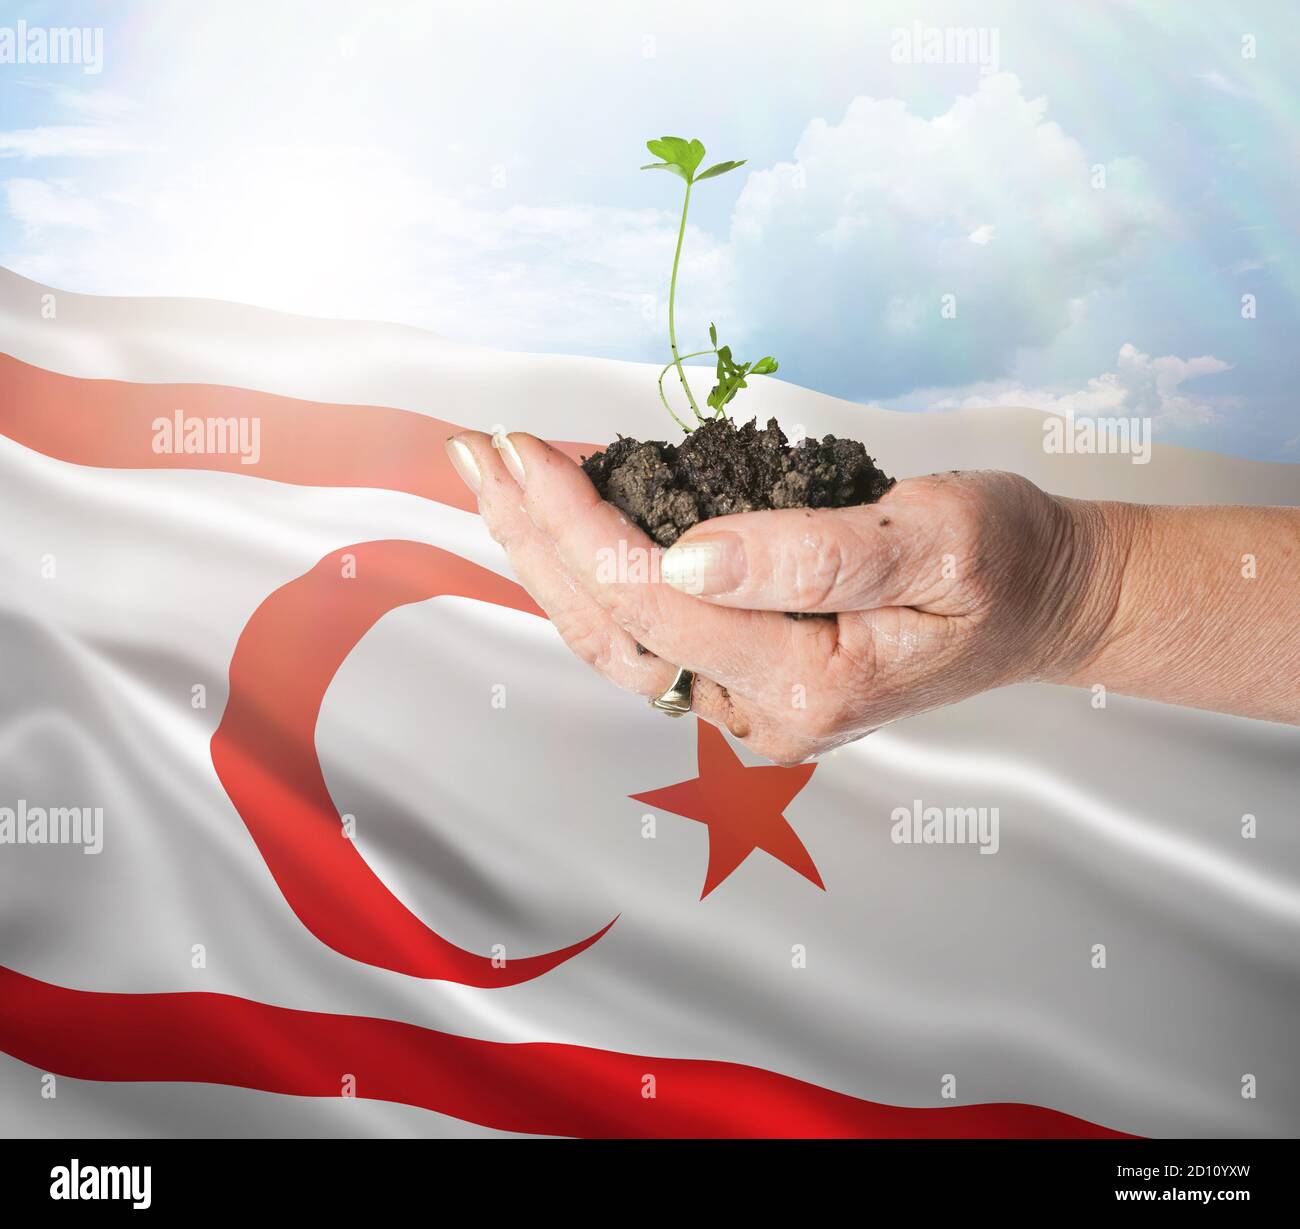 Turkish Republic of Northern Cyprus growth and new beginning. Green renewable energy and ecology concept. Hand holding young plant. Stock Photo